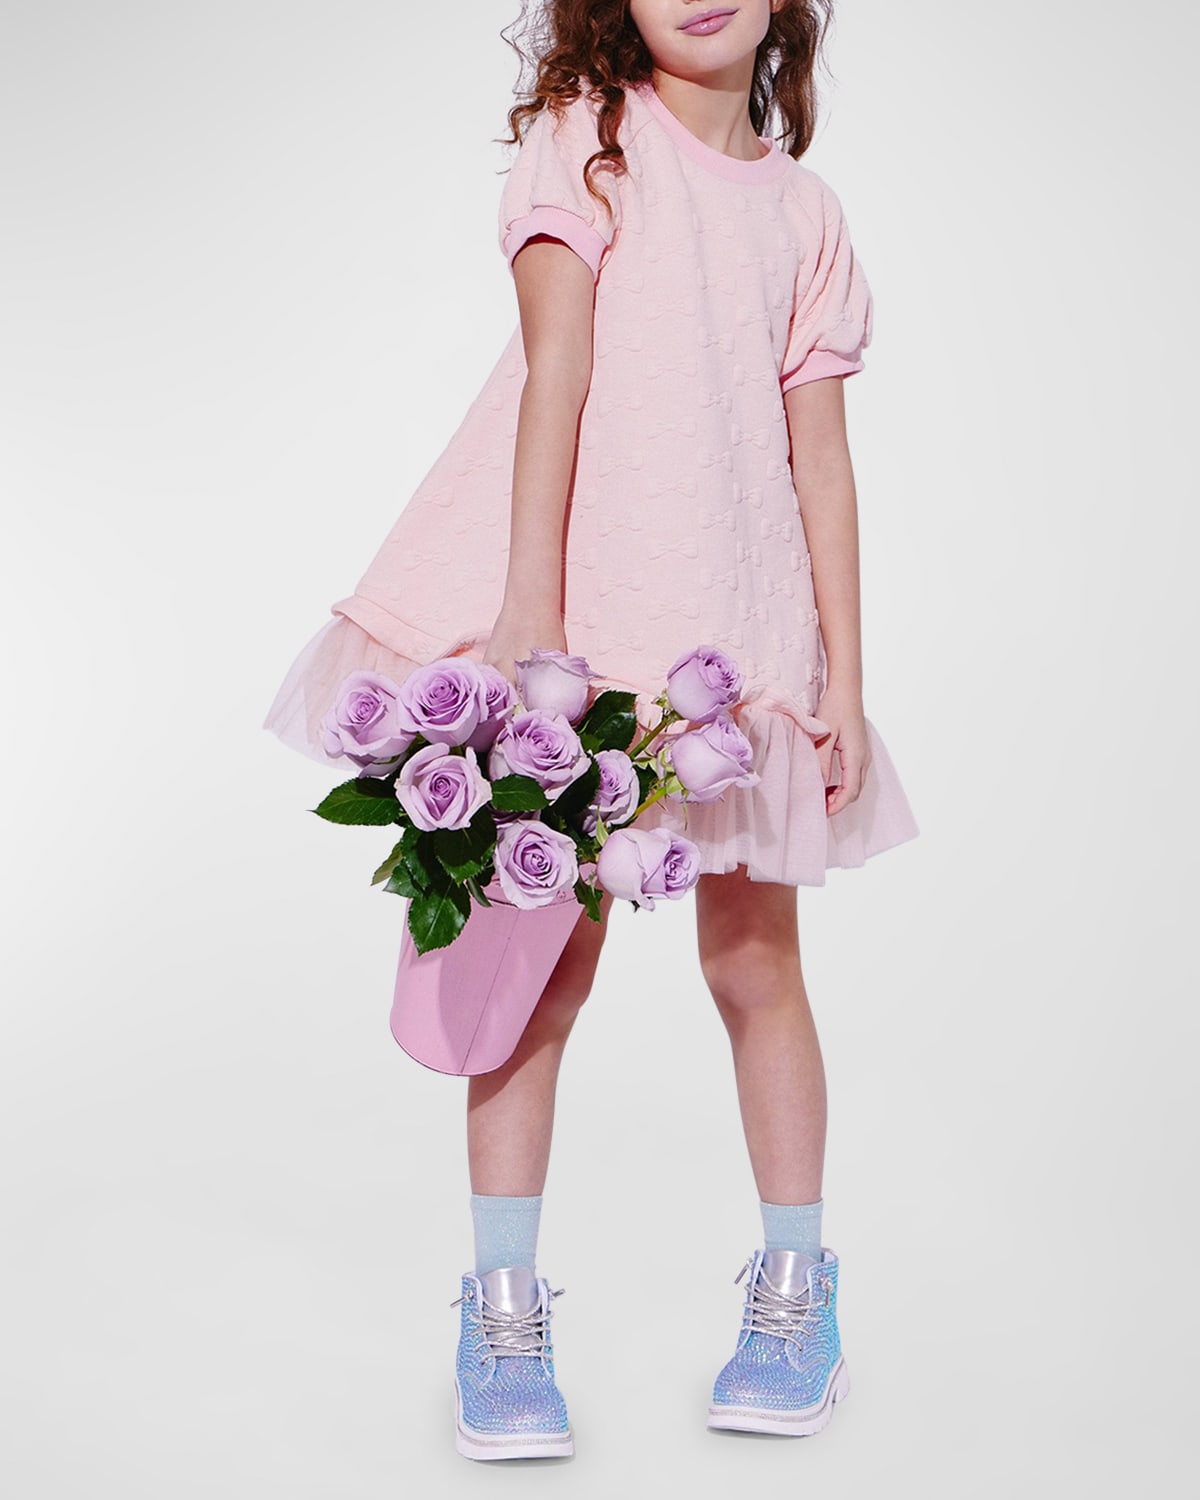 Lola + The Boys Kids' Girl's Pretty Bow T-shirt Dress In Pink